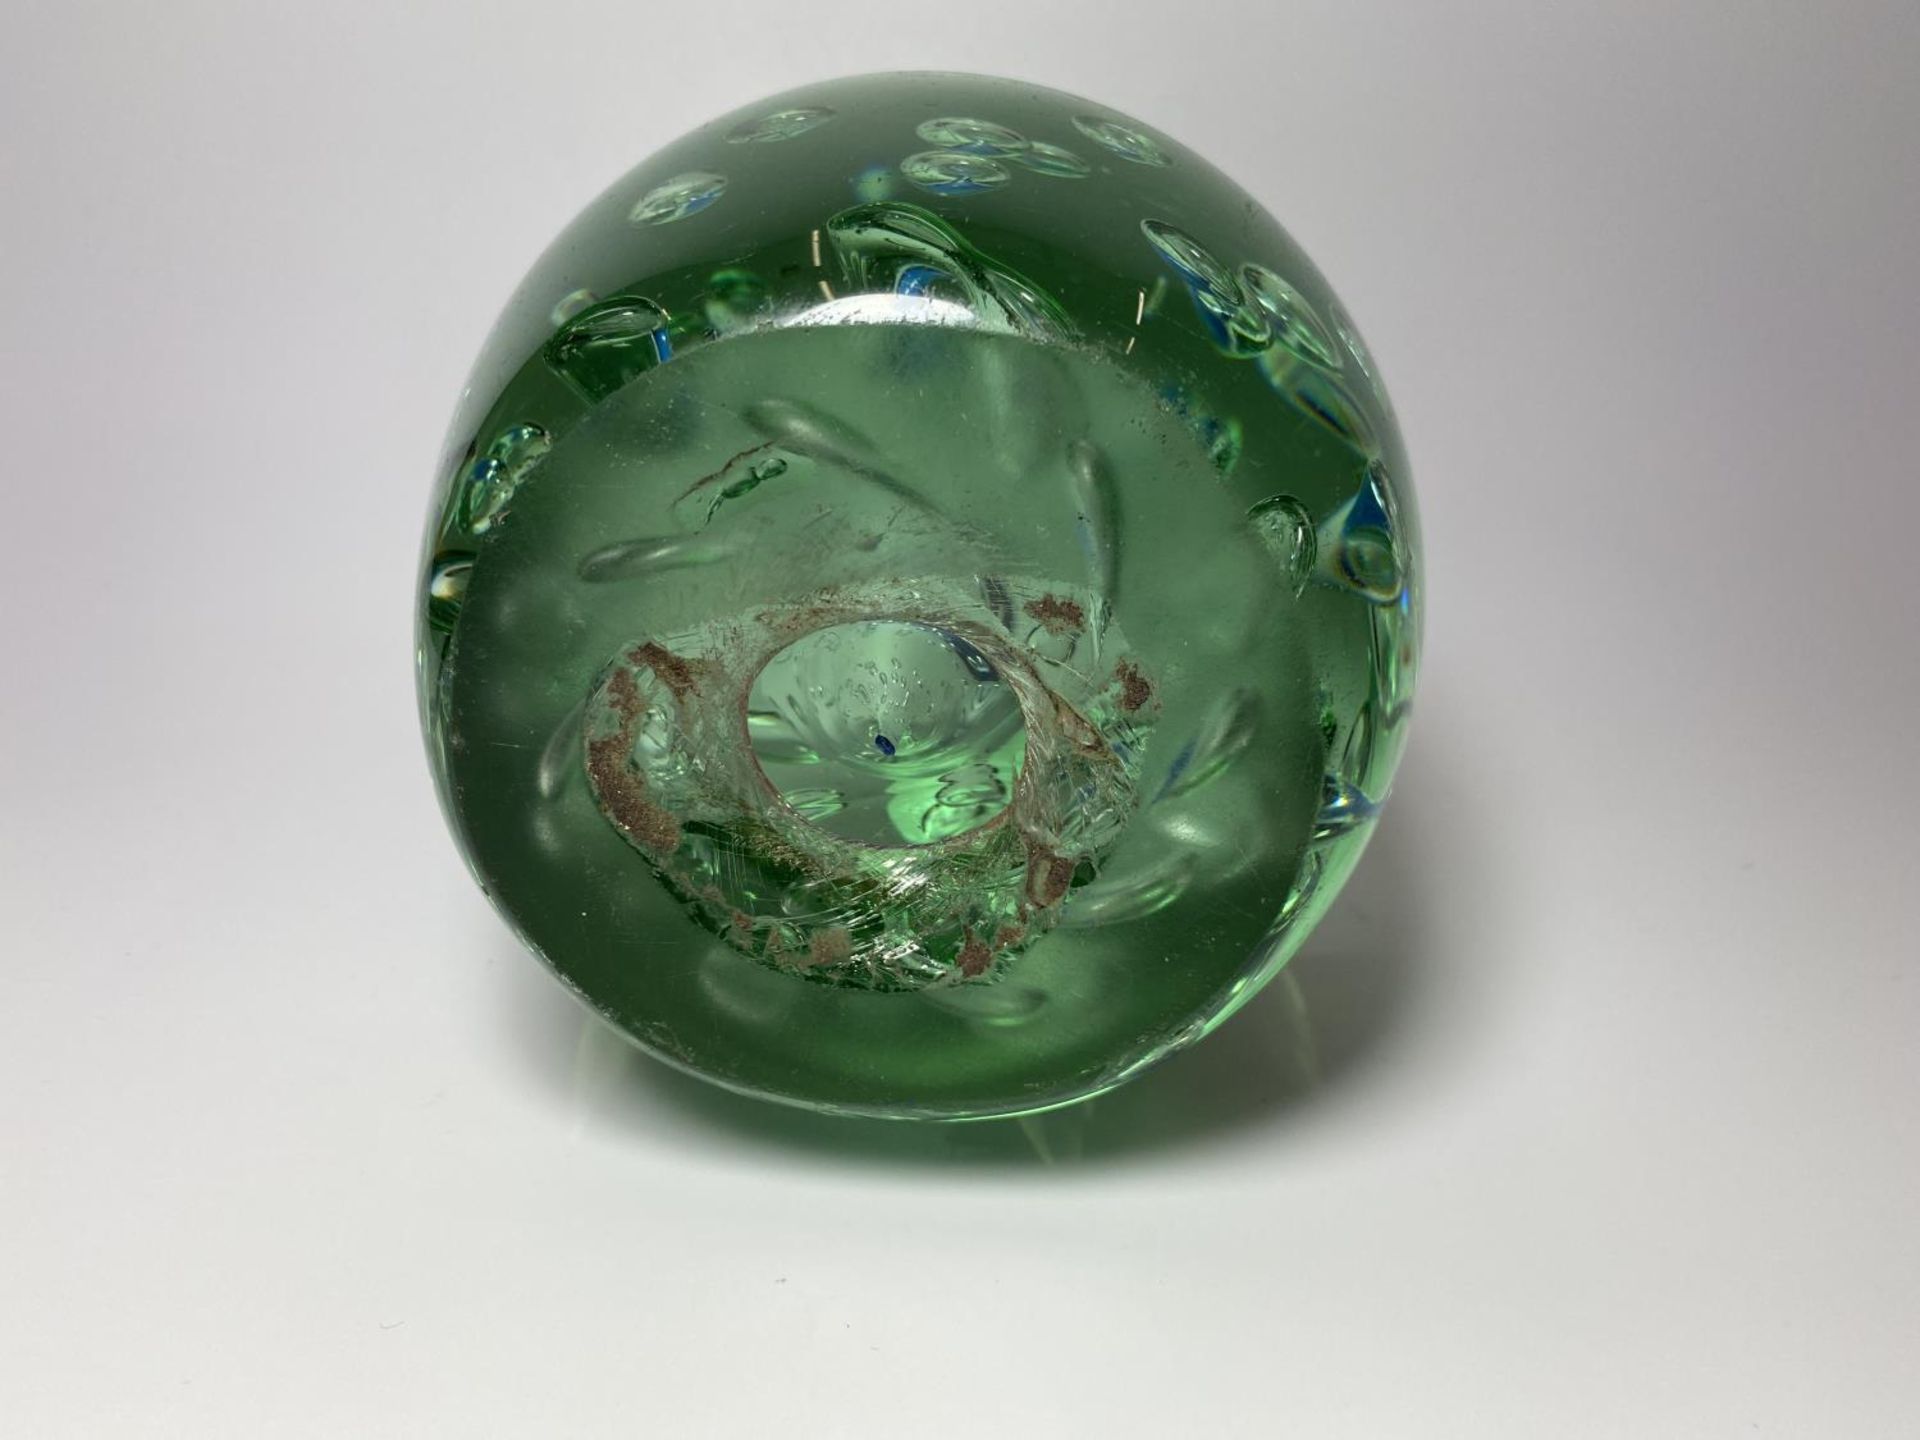 A VINTAGE HEAVY GLASS DUMP PAPERWEIGHT - Image 2 of 2